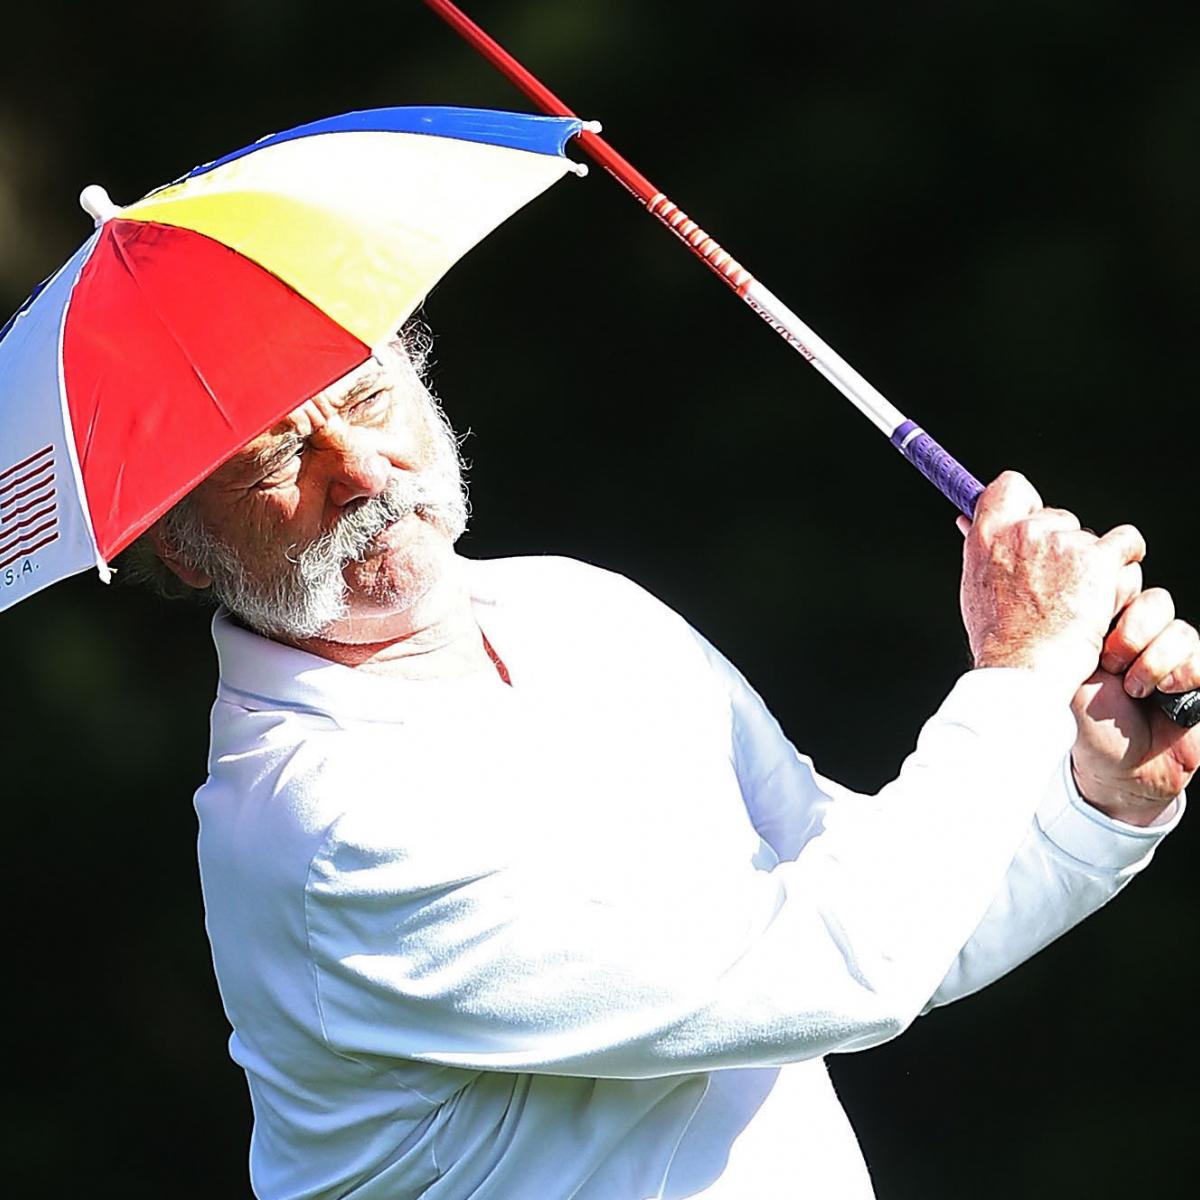 Bill Murray's legend continues to grow at Pebble Beach